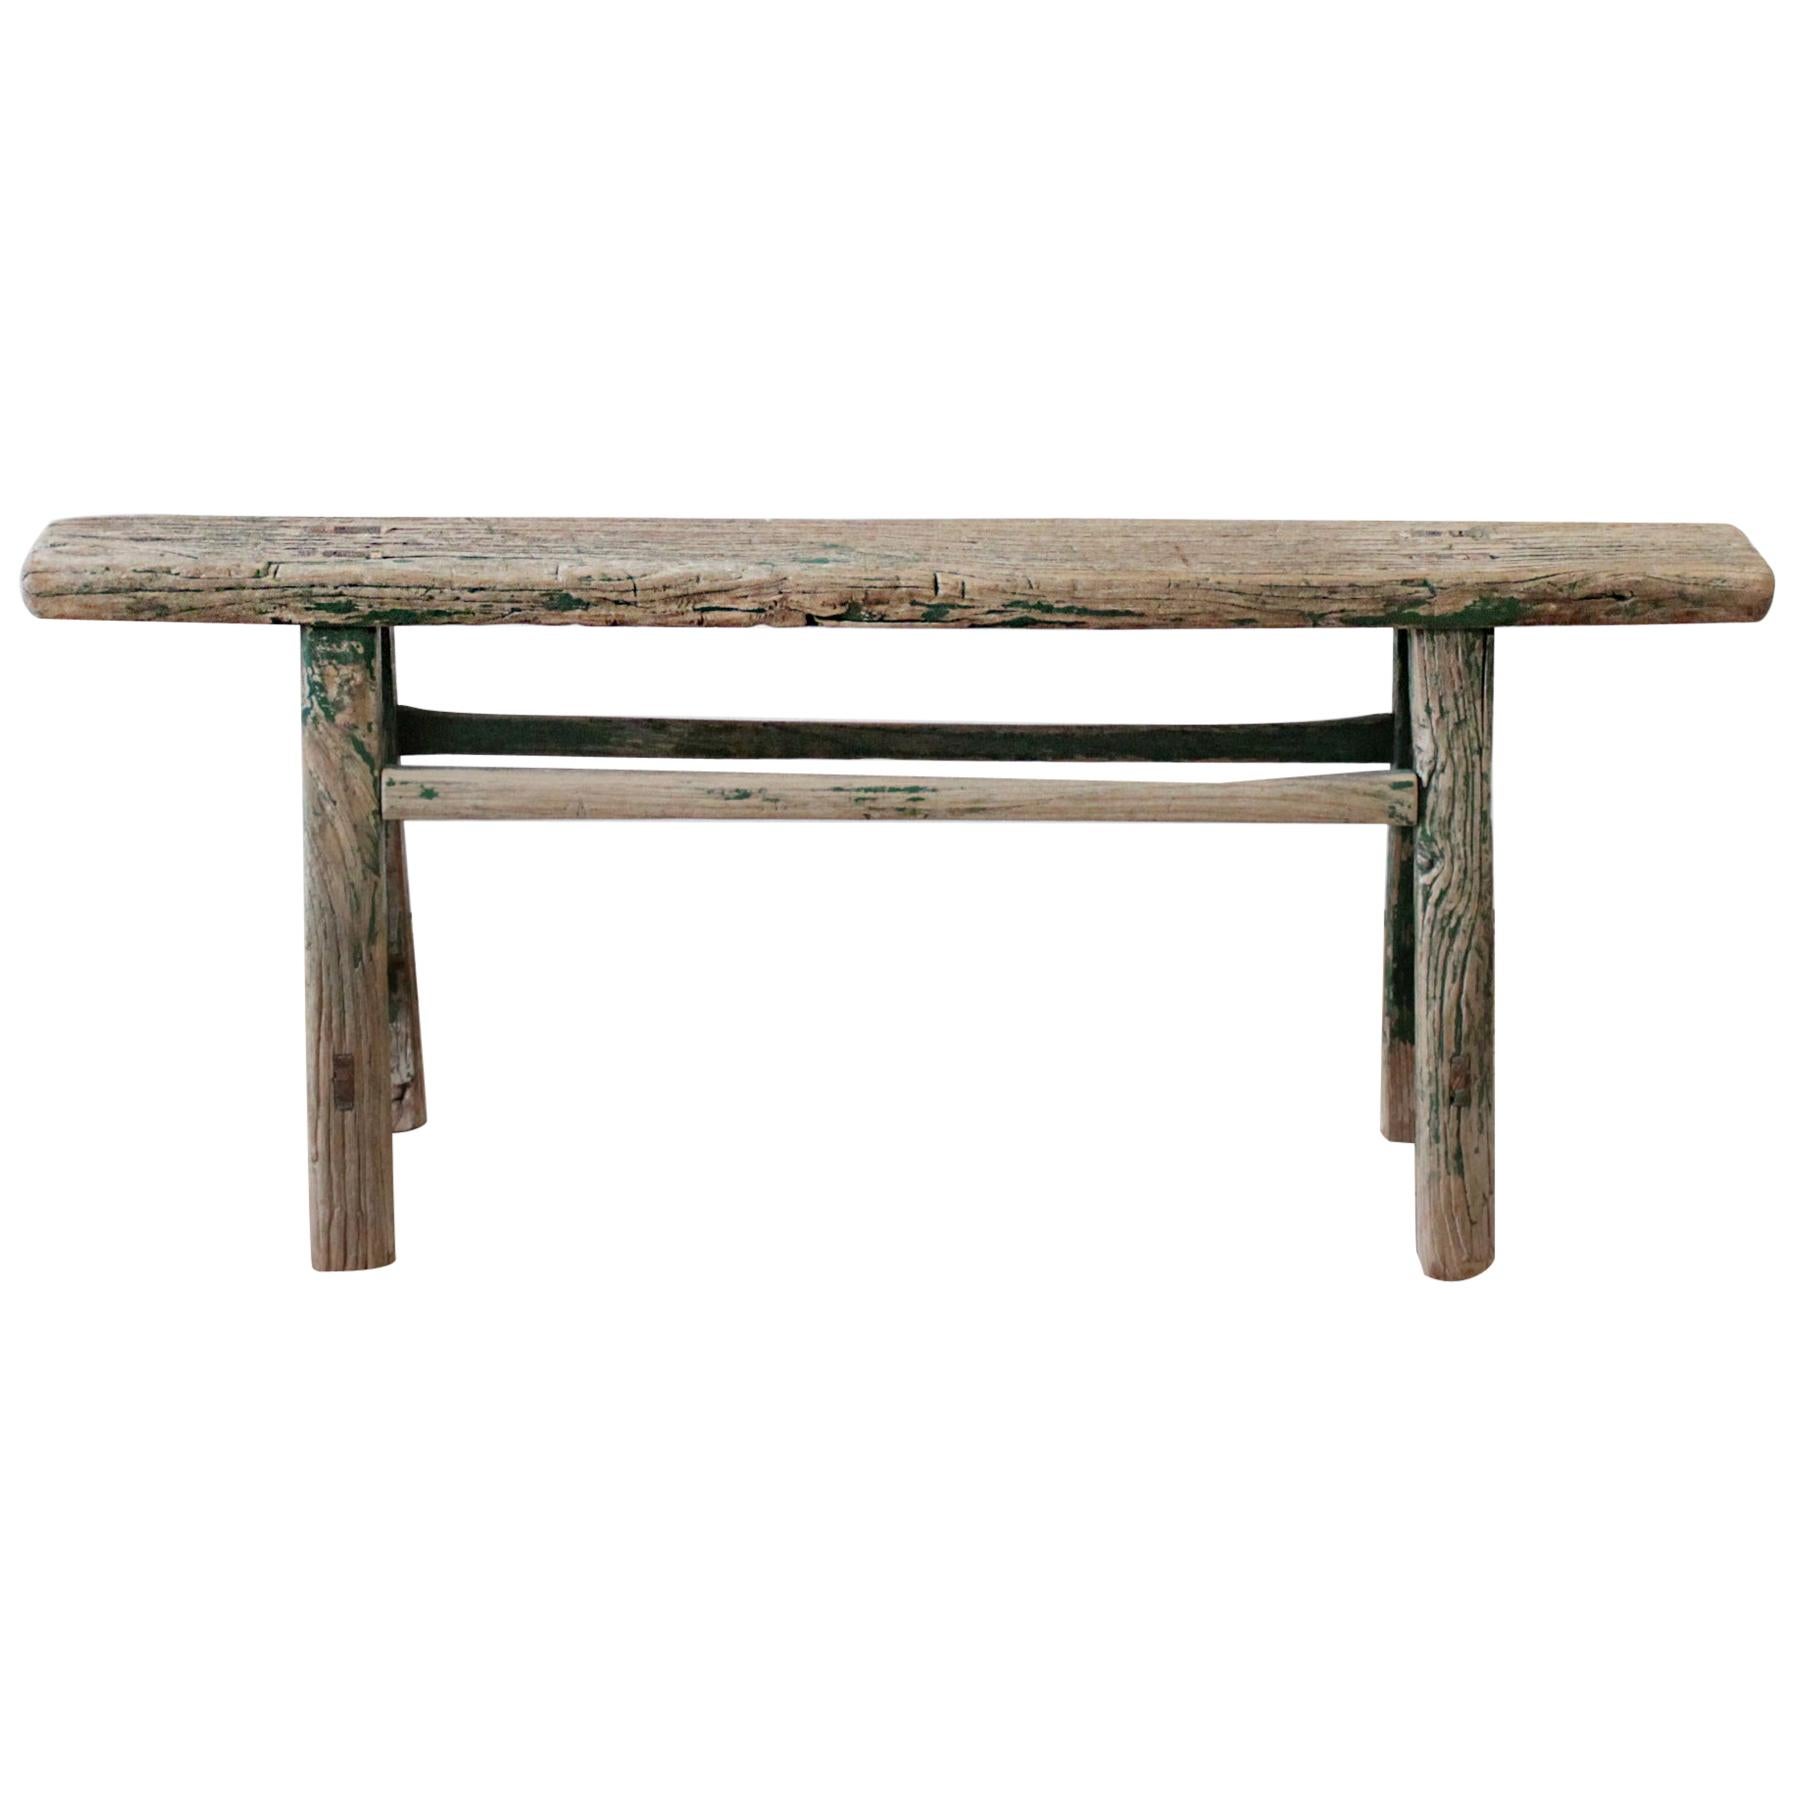 Antique Asian Elm Wood Bench with Faded Green Paint